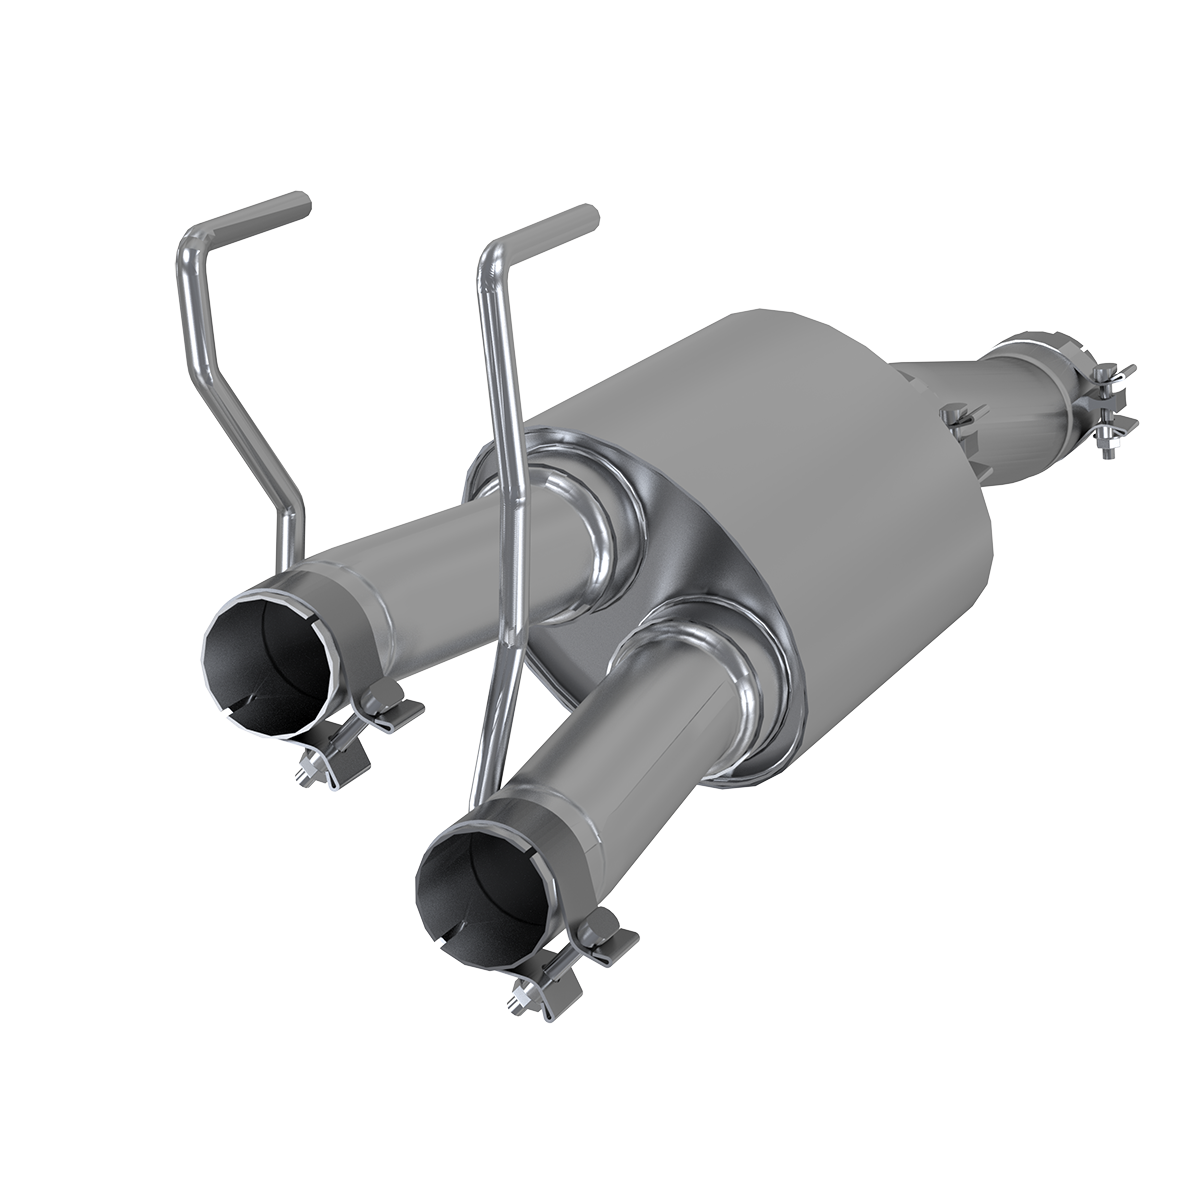 MBRP - MBRP Dodge 3 Inch Single/Dual Out Muffler Replacement XP Series For 09-18 RAM 1500, 5.7L Hemi S5141409